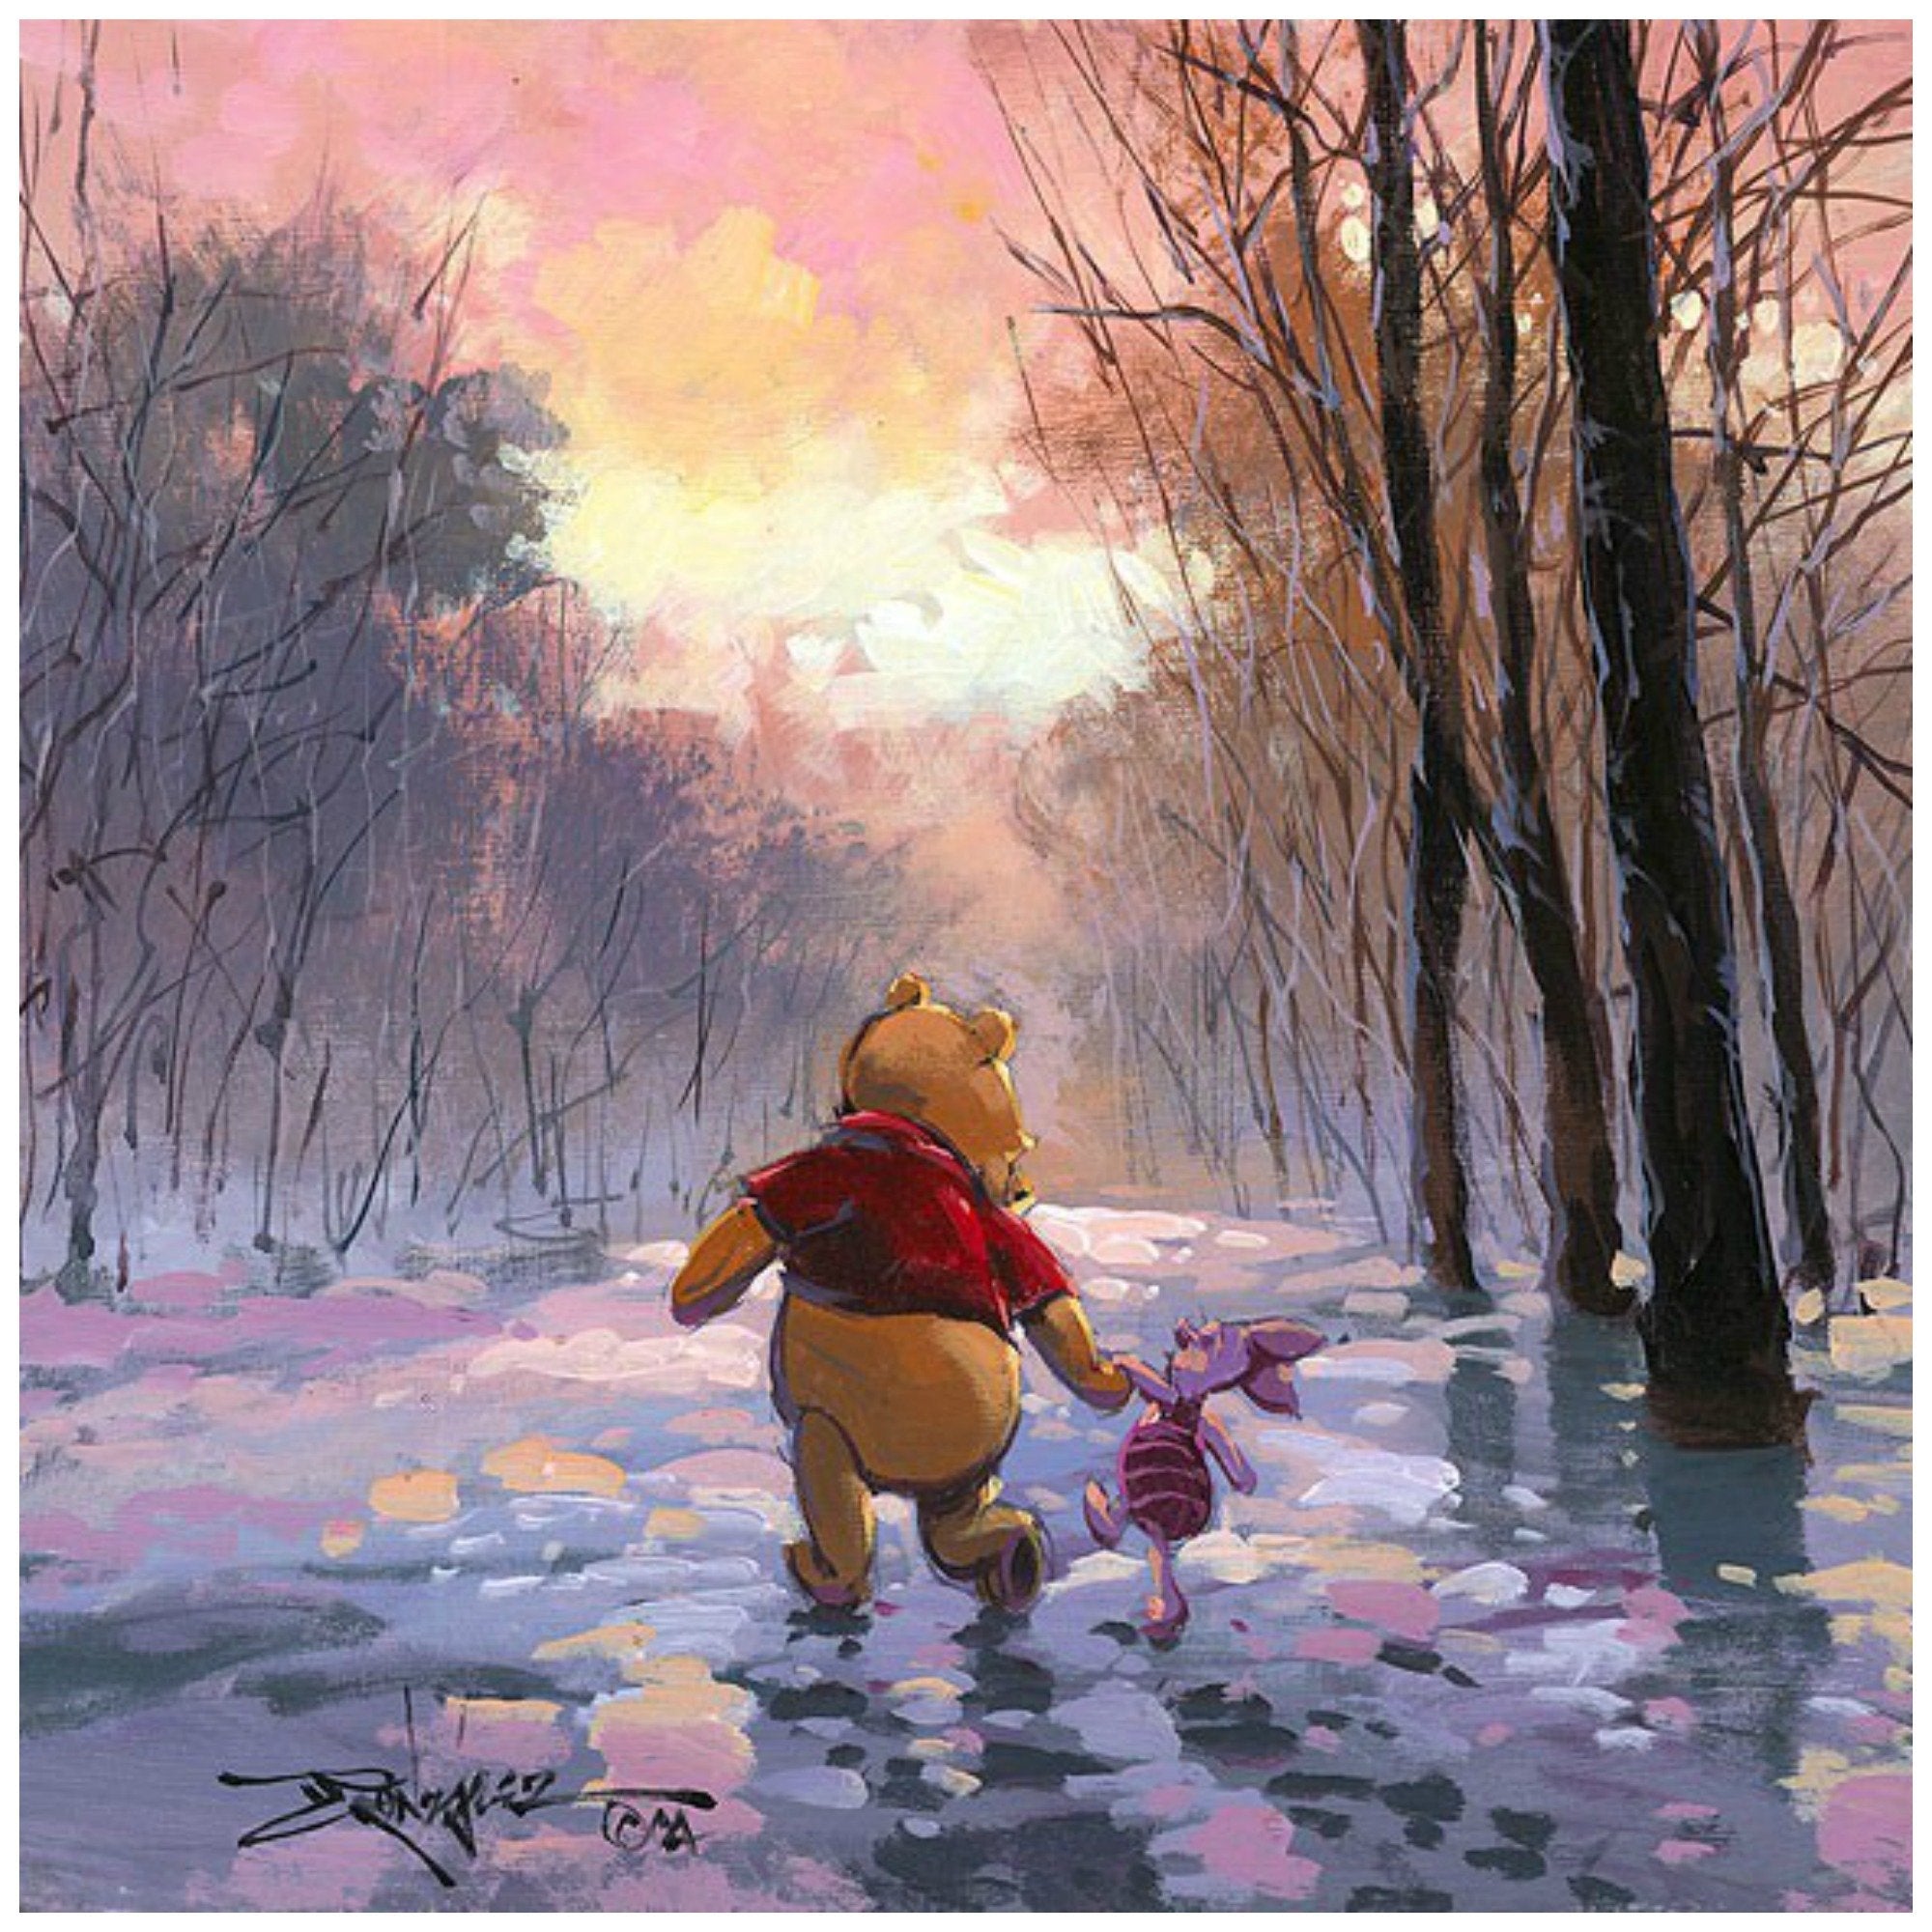 Snowy Path by Rodel Gonzalez.  Winnie the Pooh and his friend Piglet take a winter day stroll through a snowy path - closeup